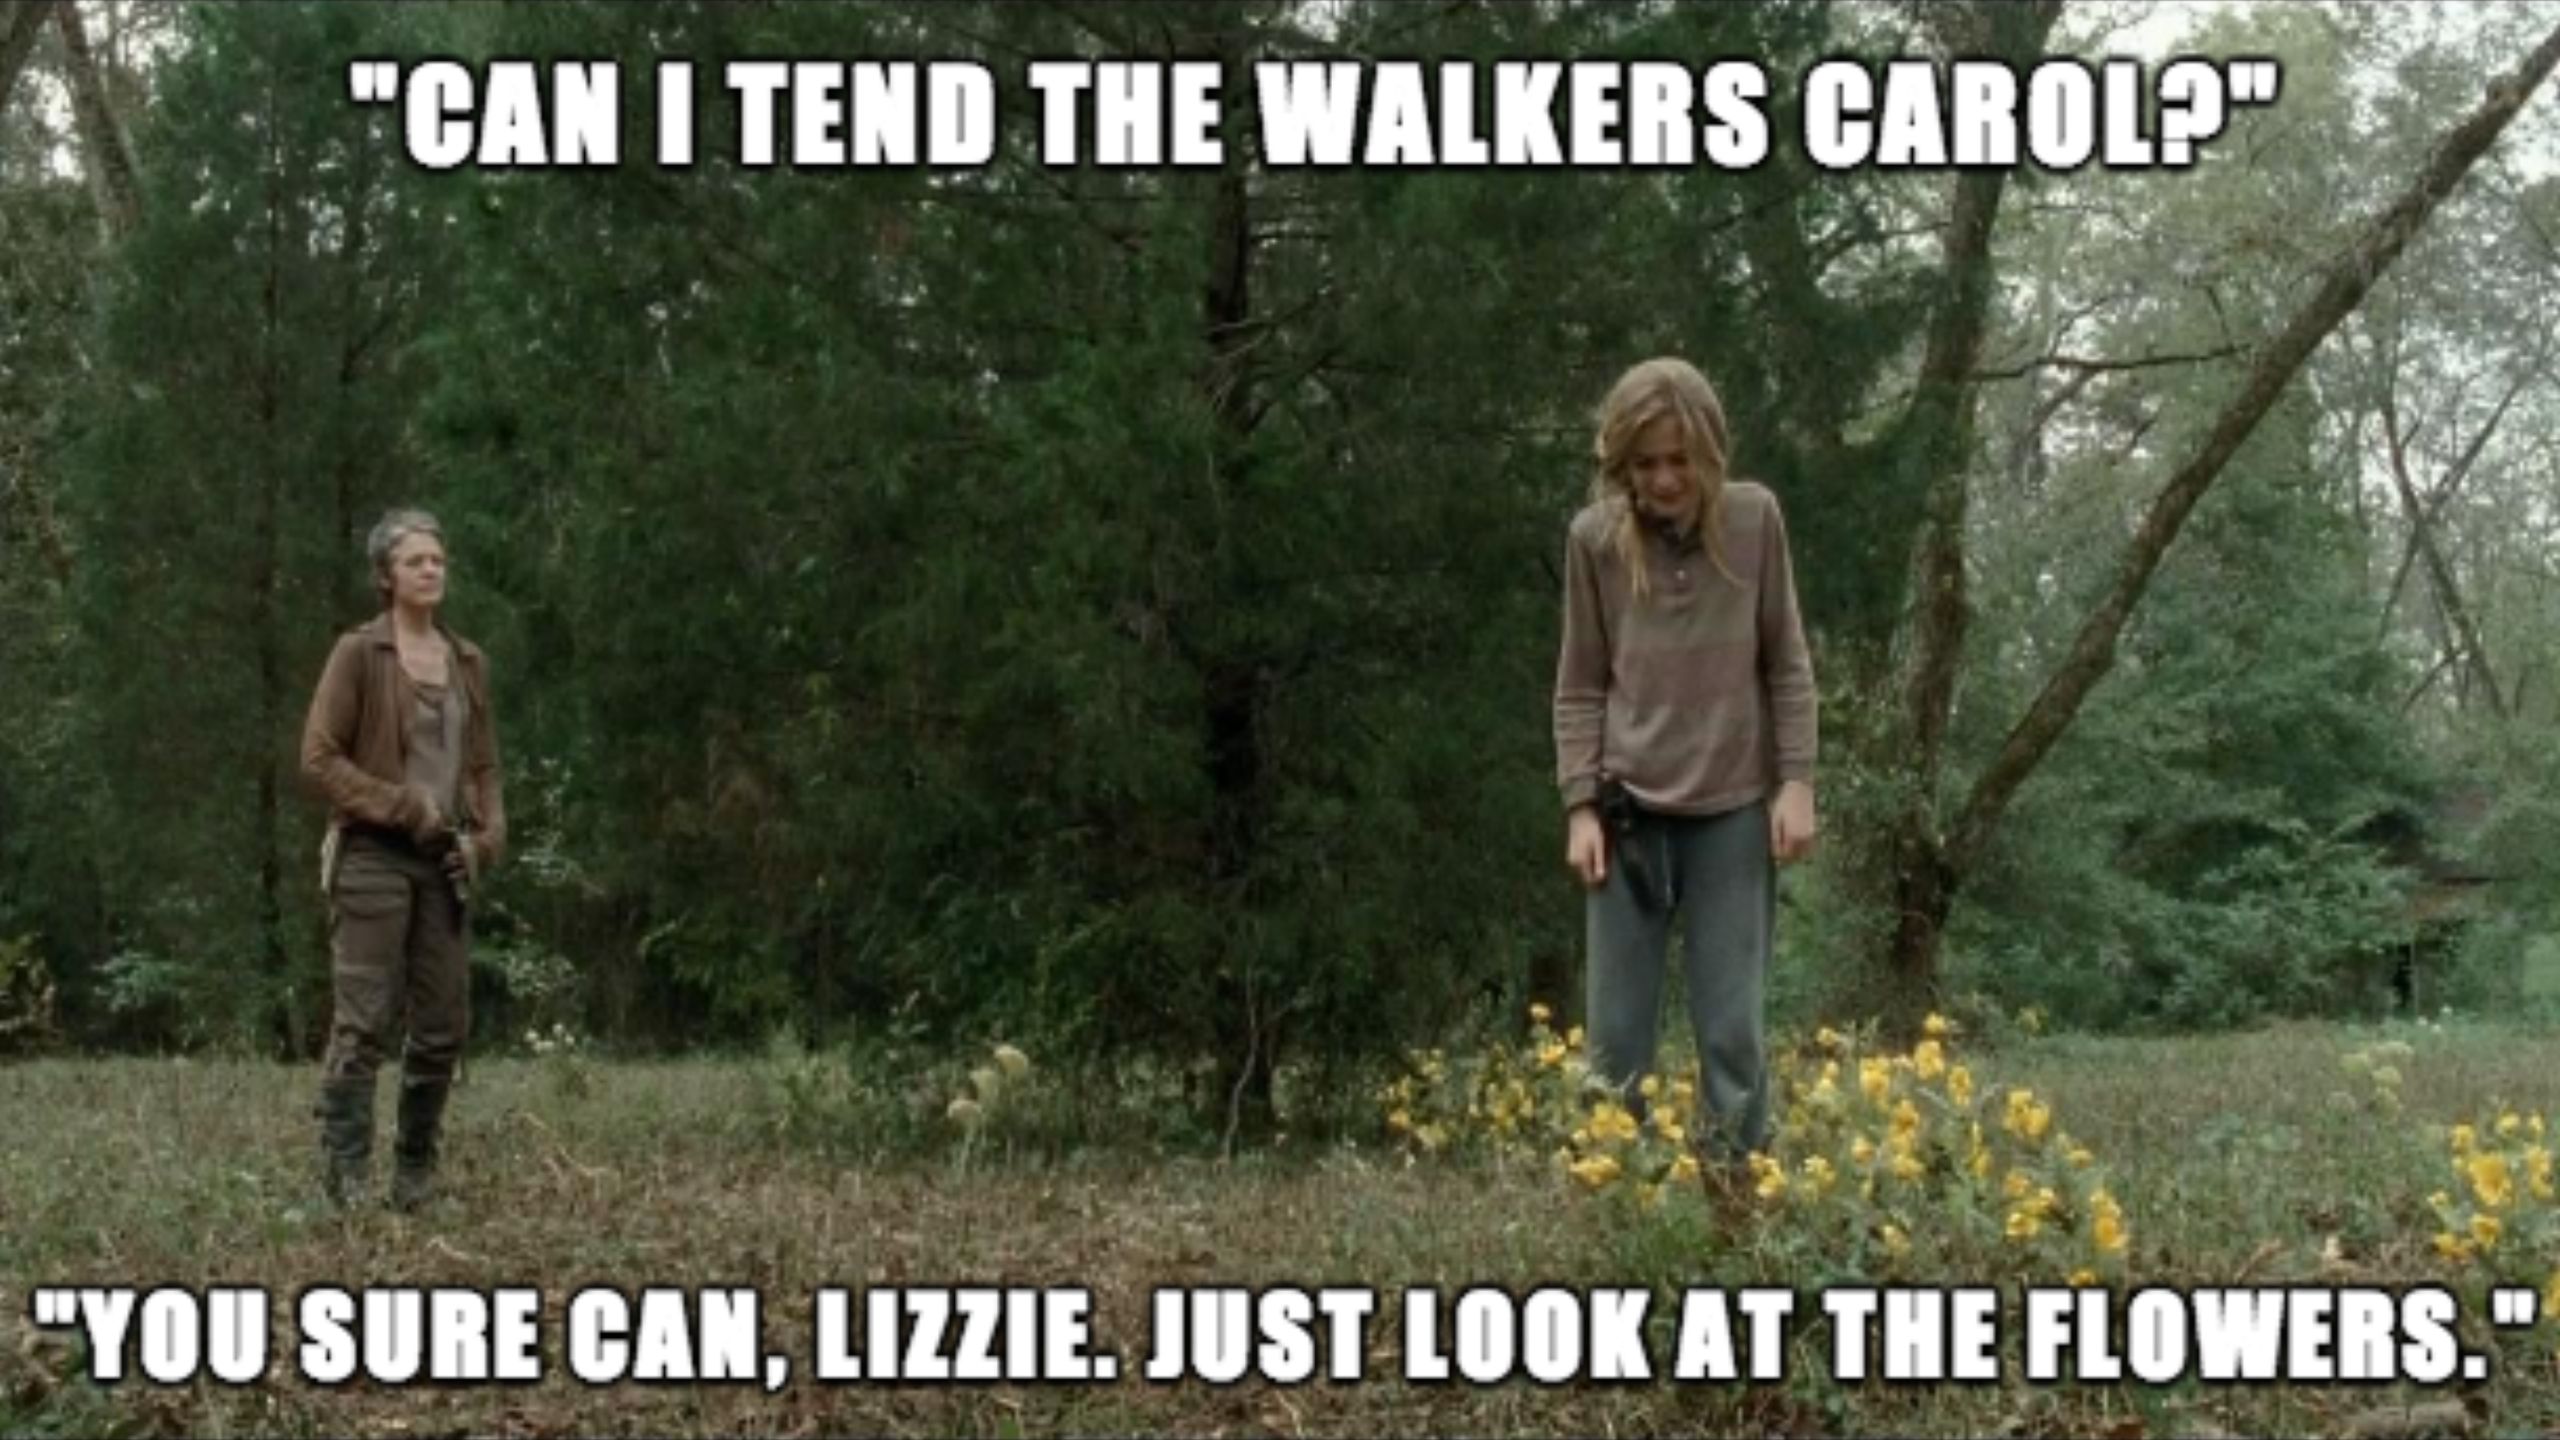 Meme about Carol telling Lizzie to look at the flowers. 